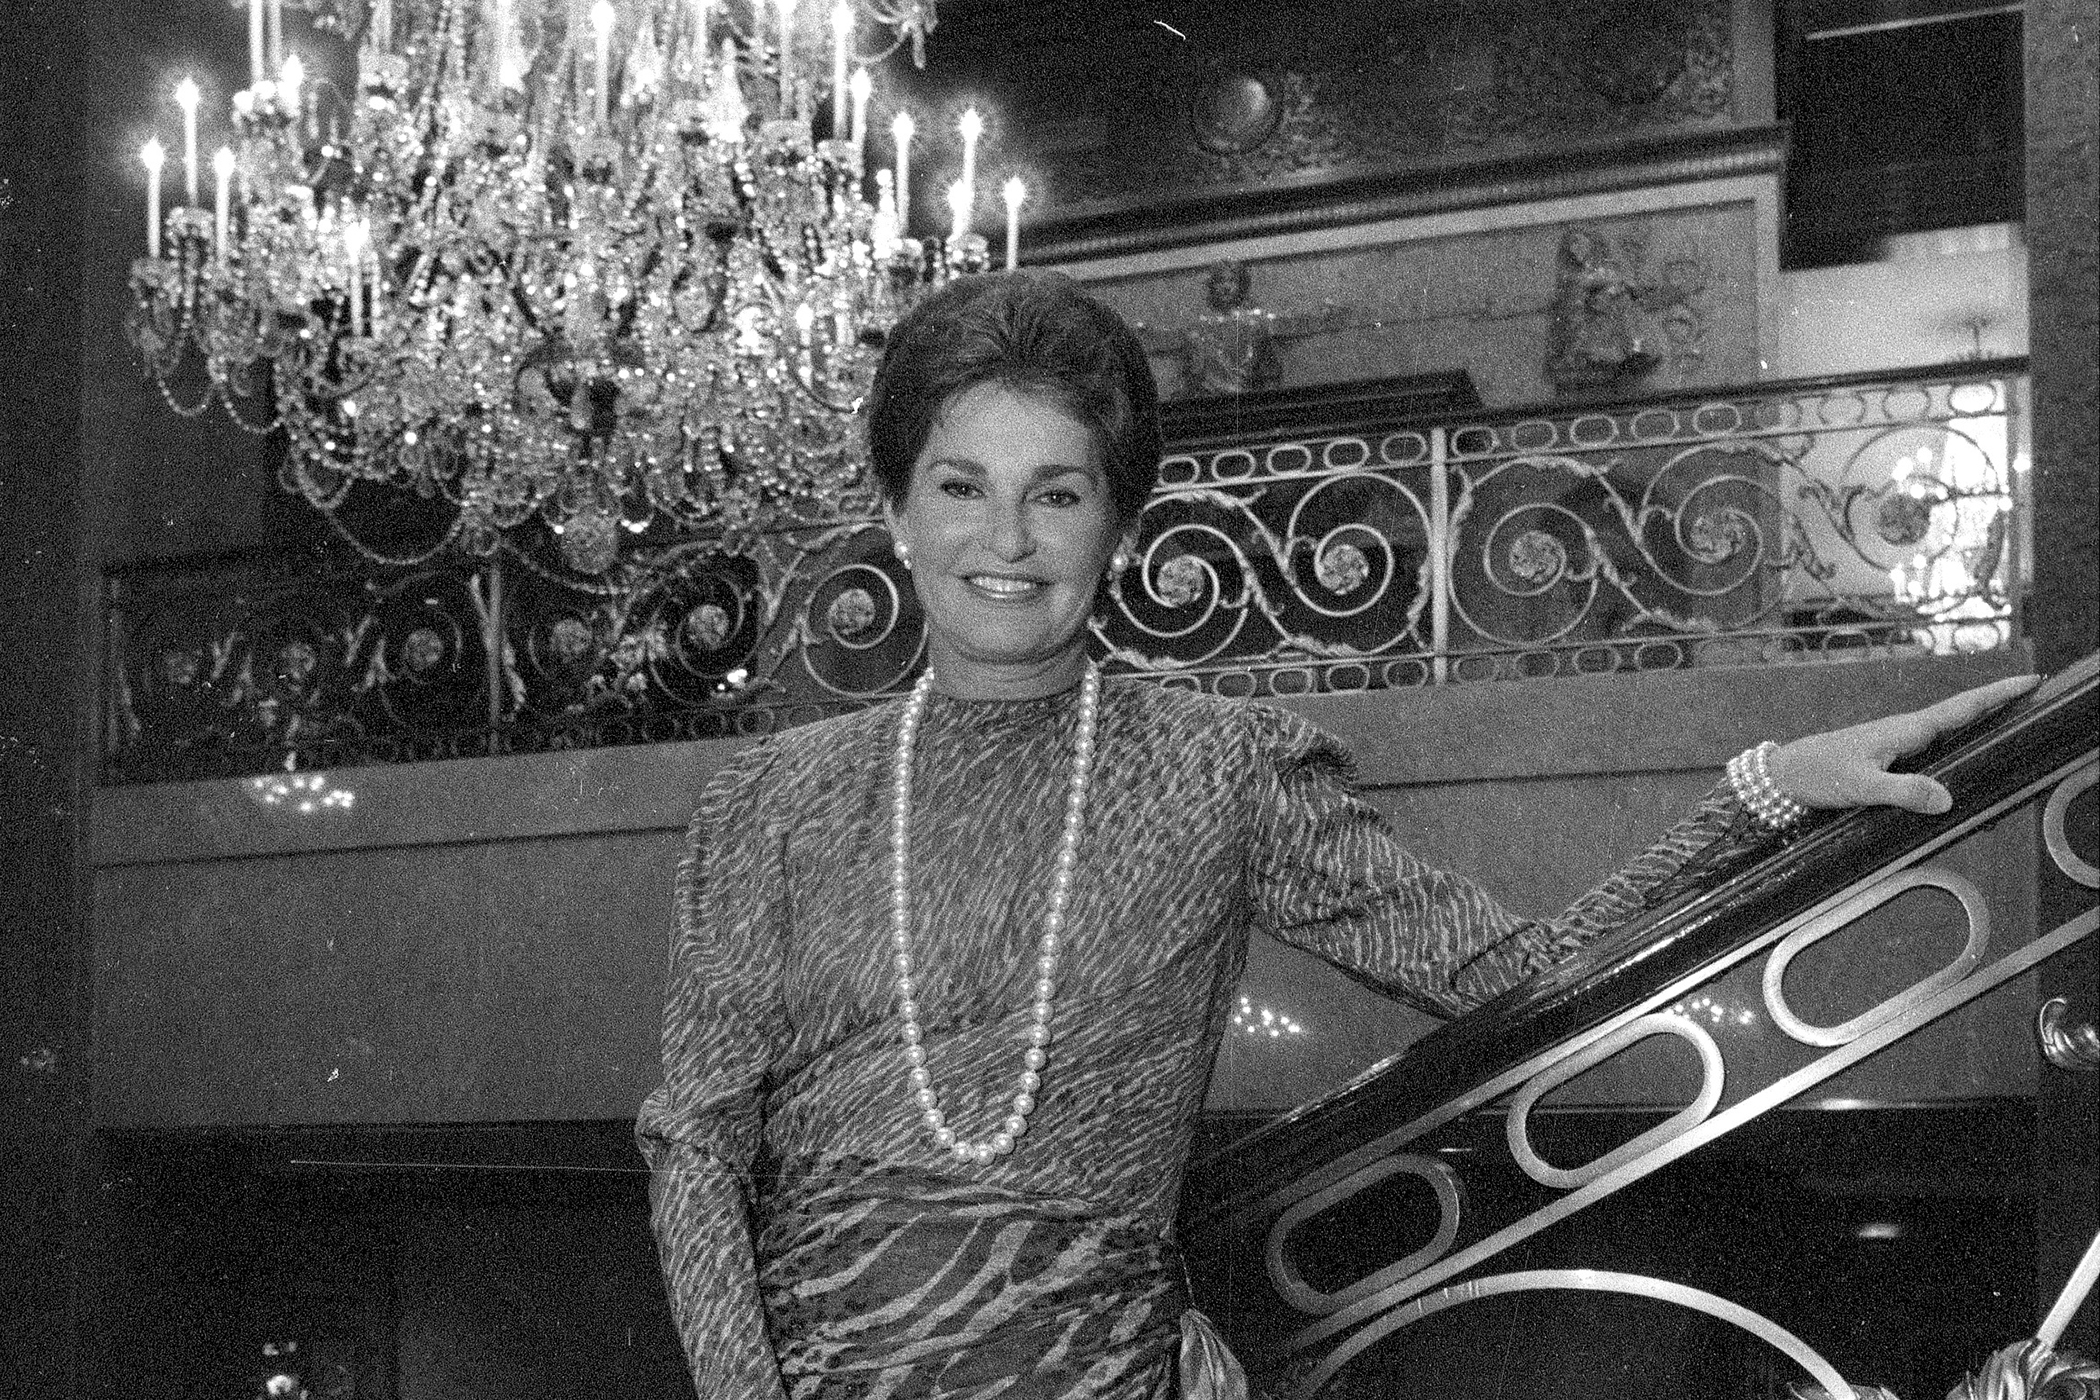 Leona Helmsley in The Helmsley palace, 50th Street and Madison Avenue, 2002.